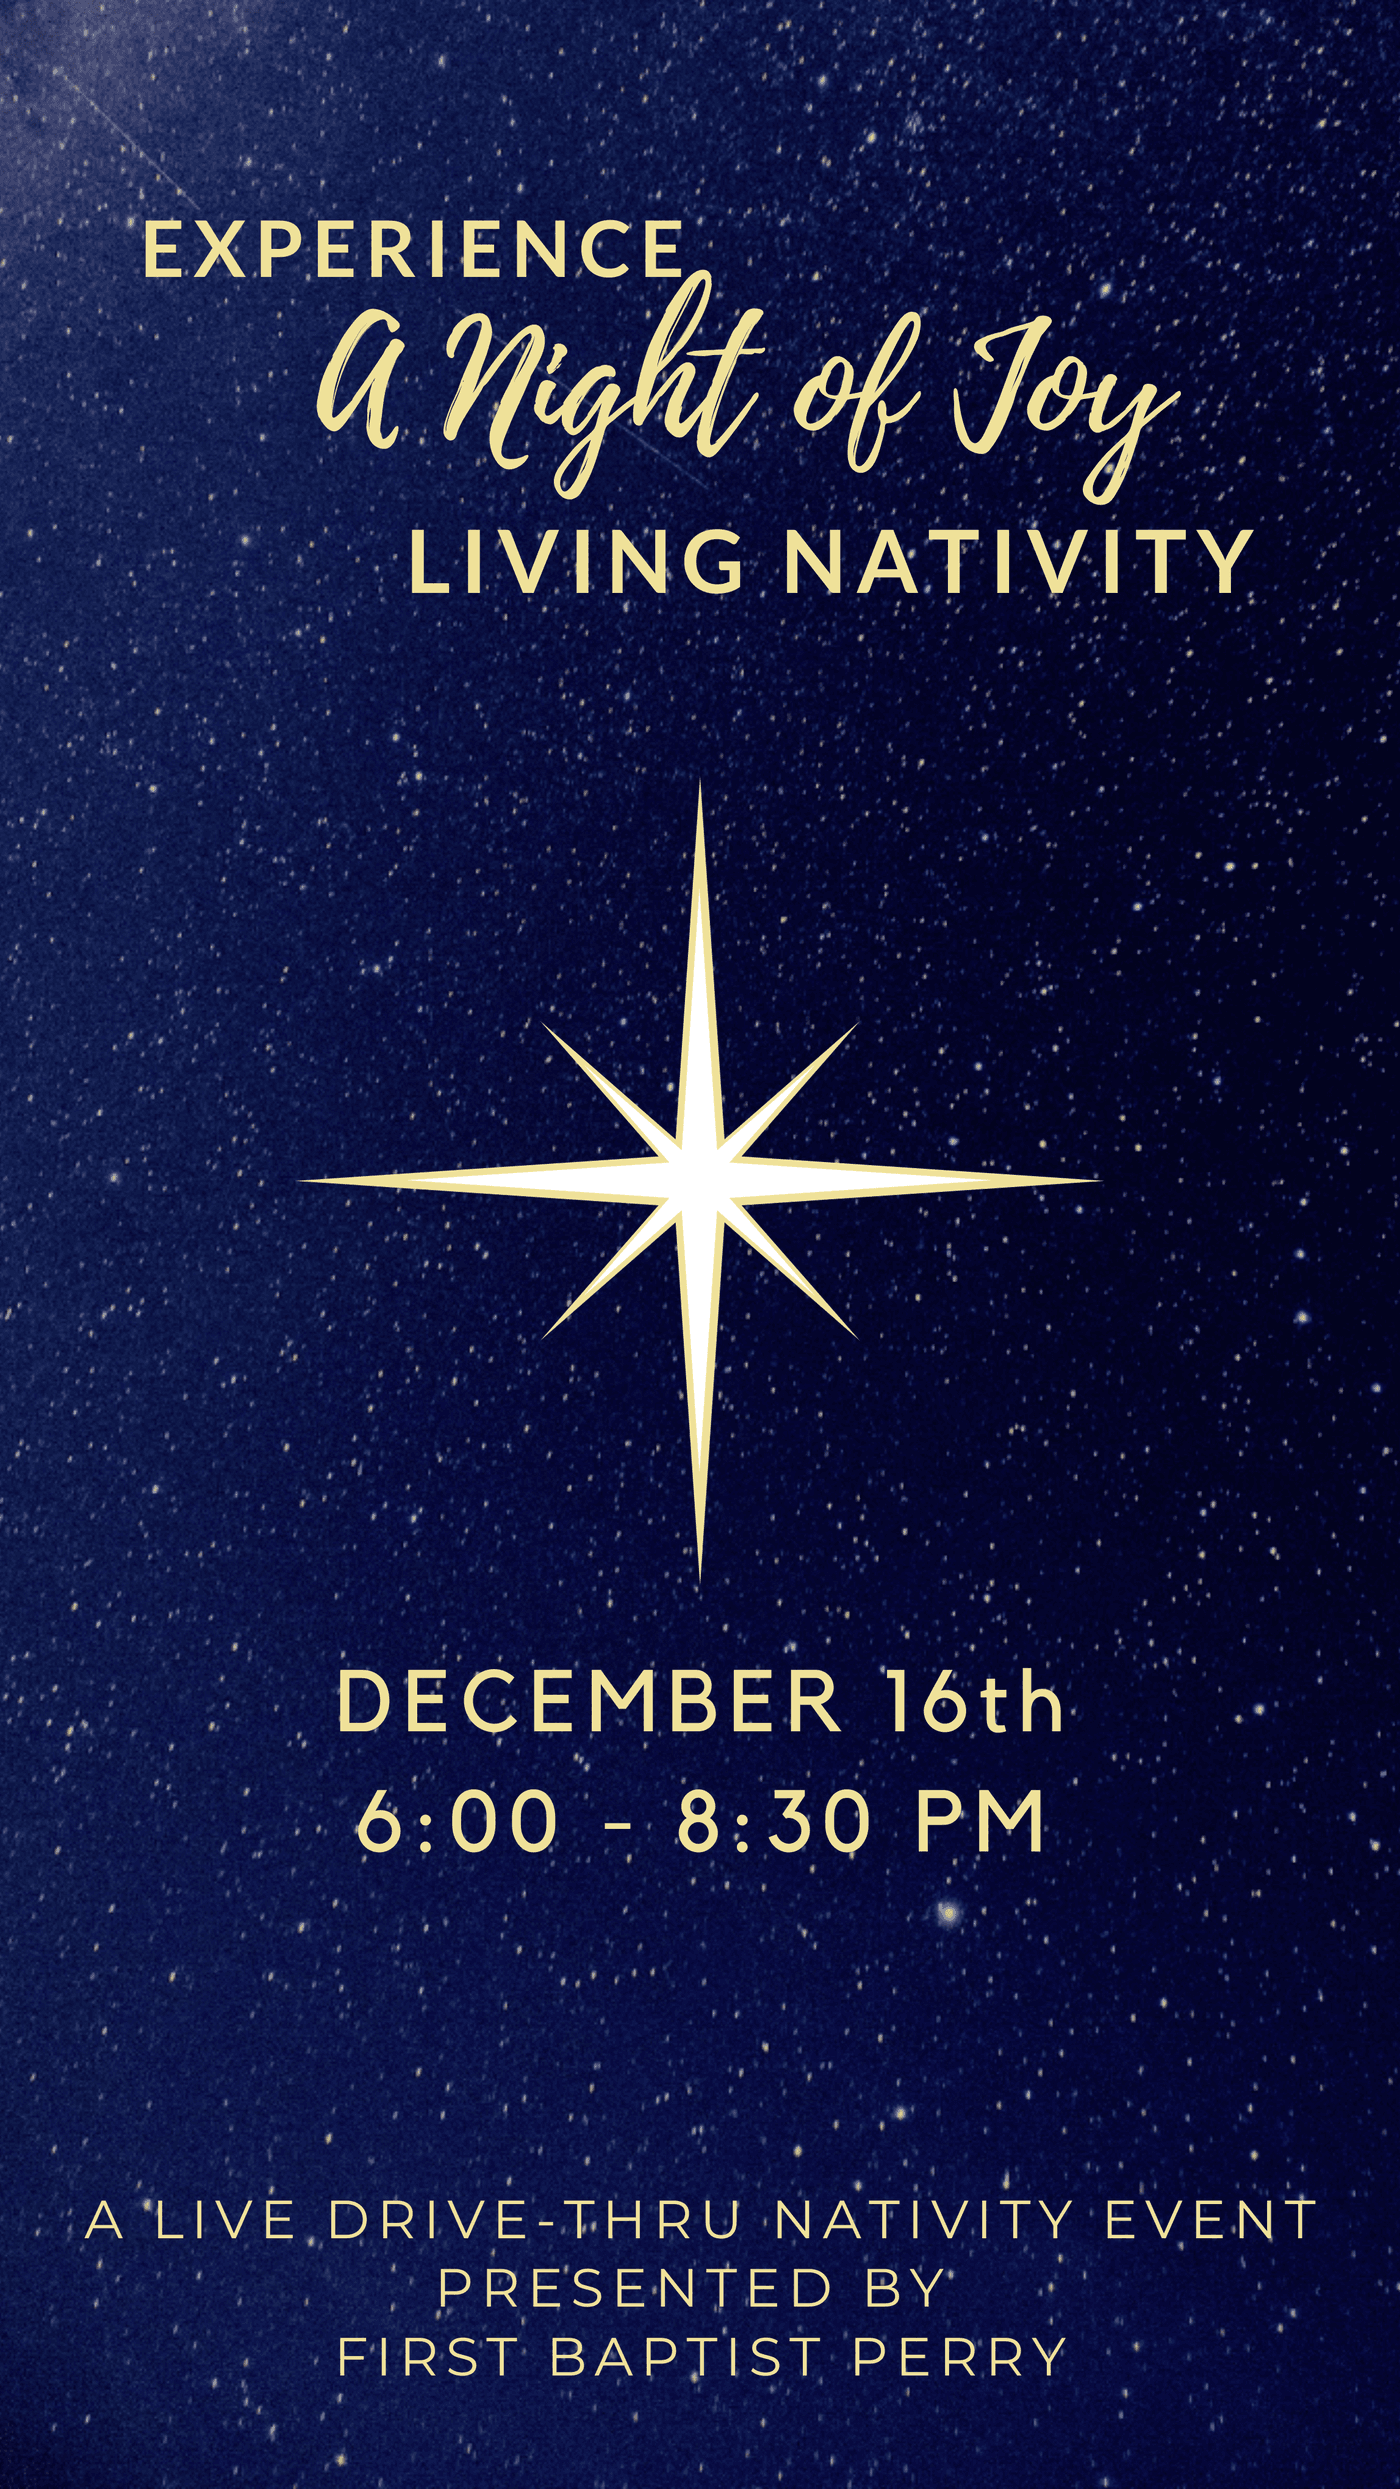 A night of joy living nativity return refresh and remember